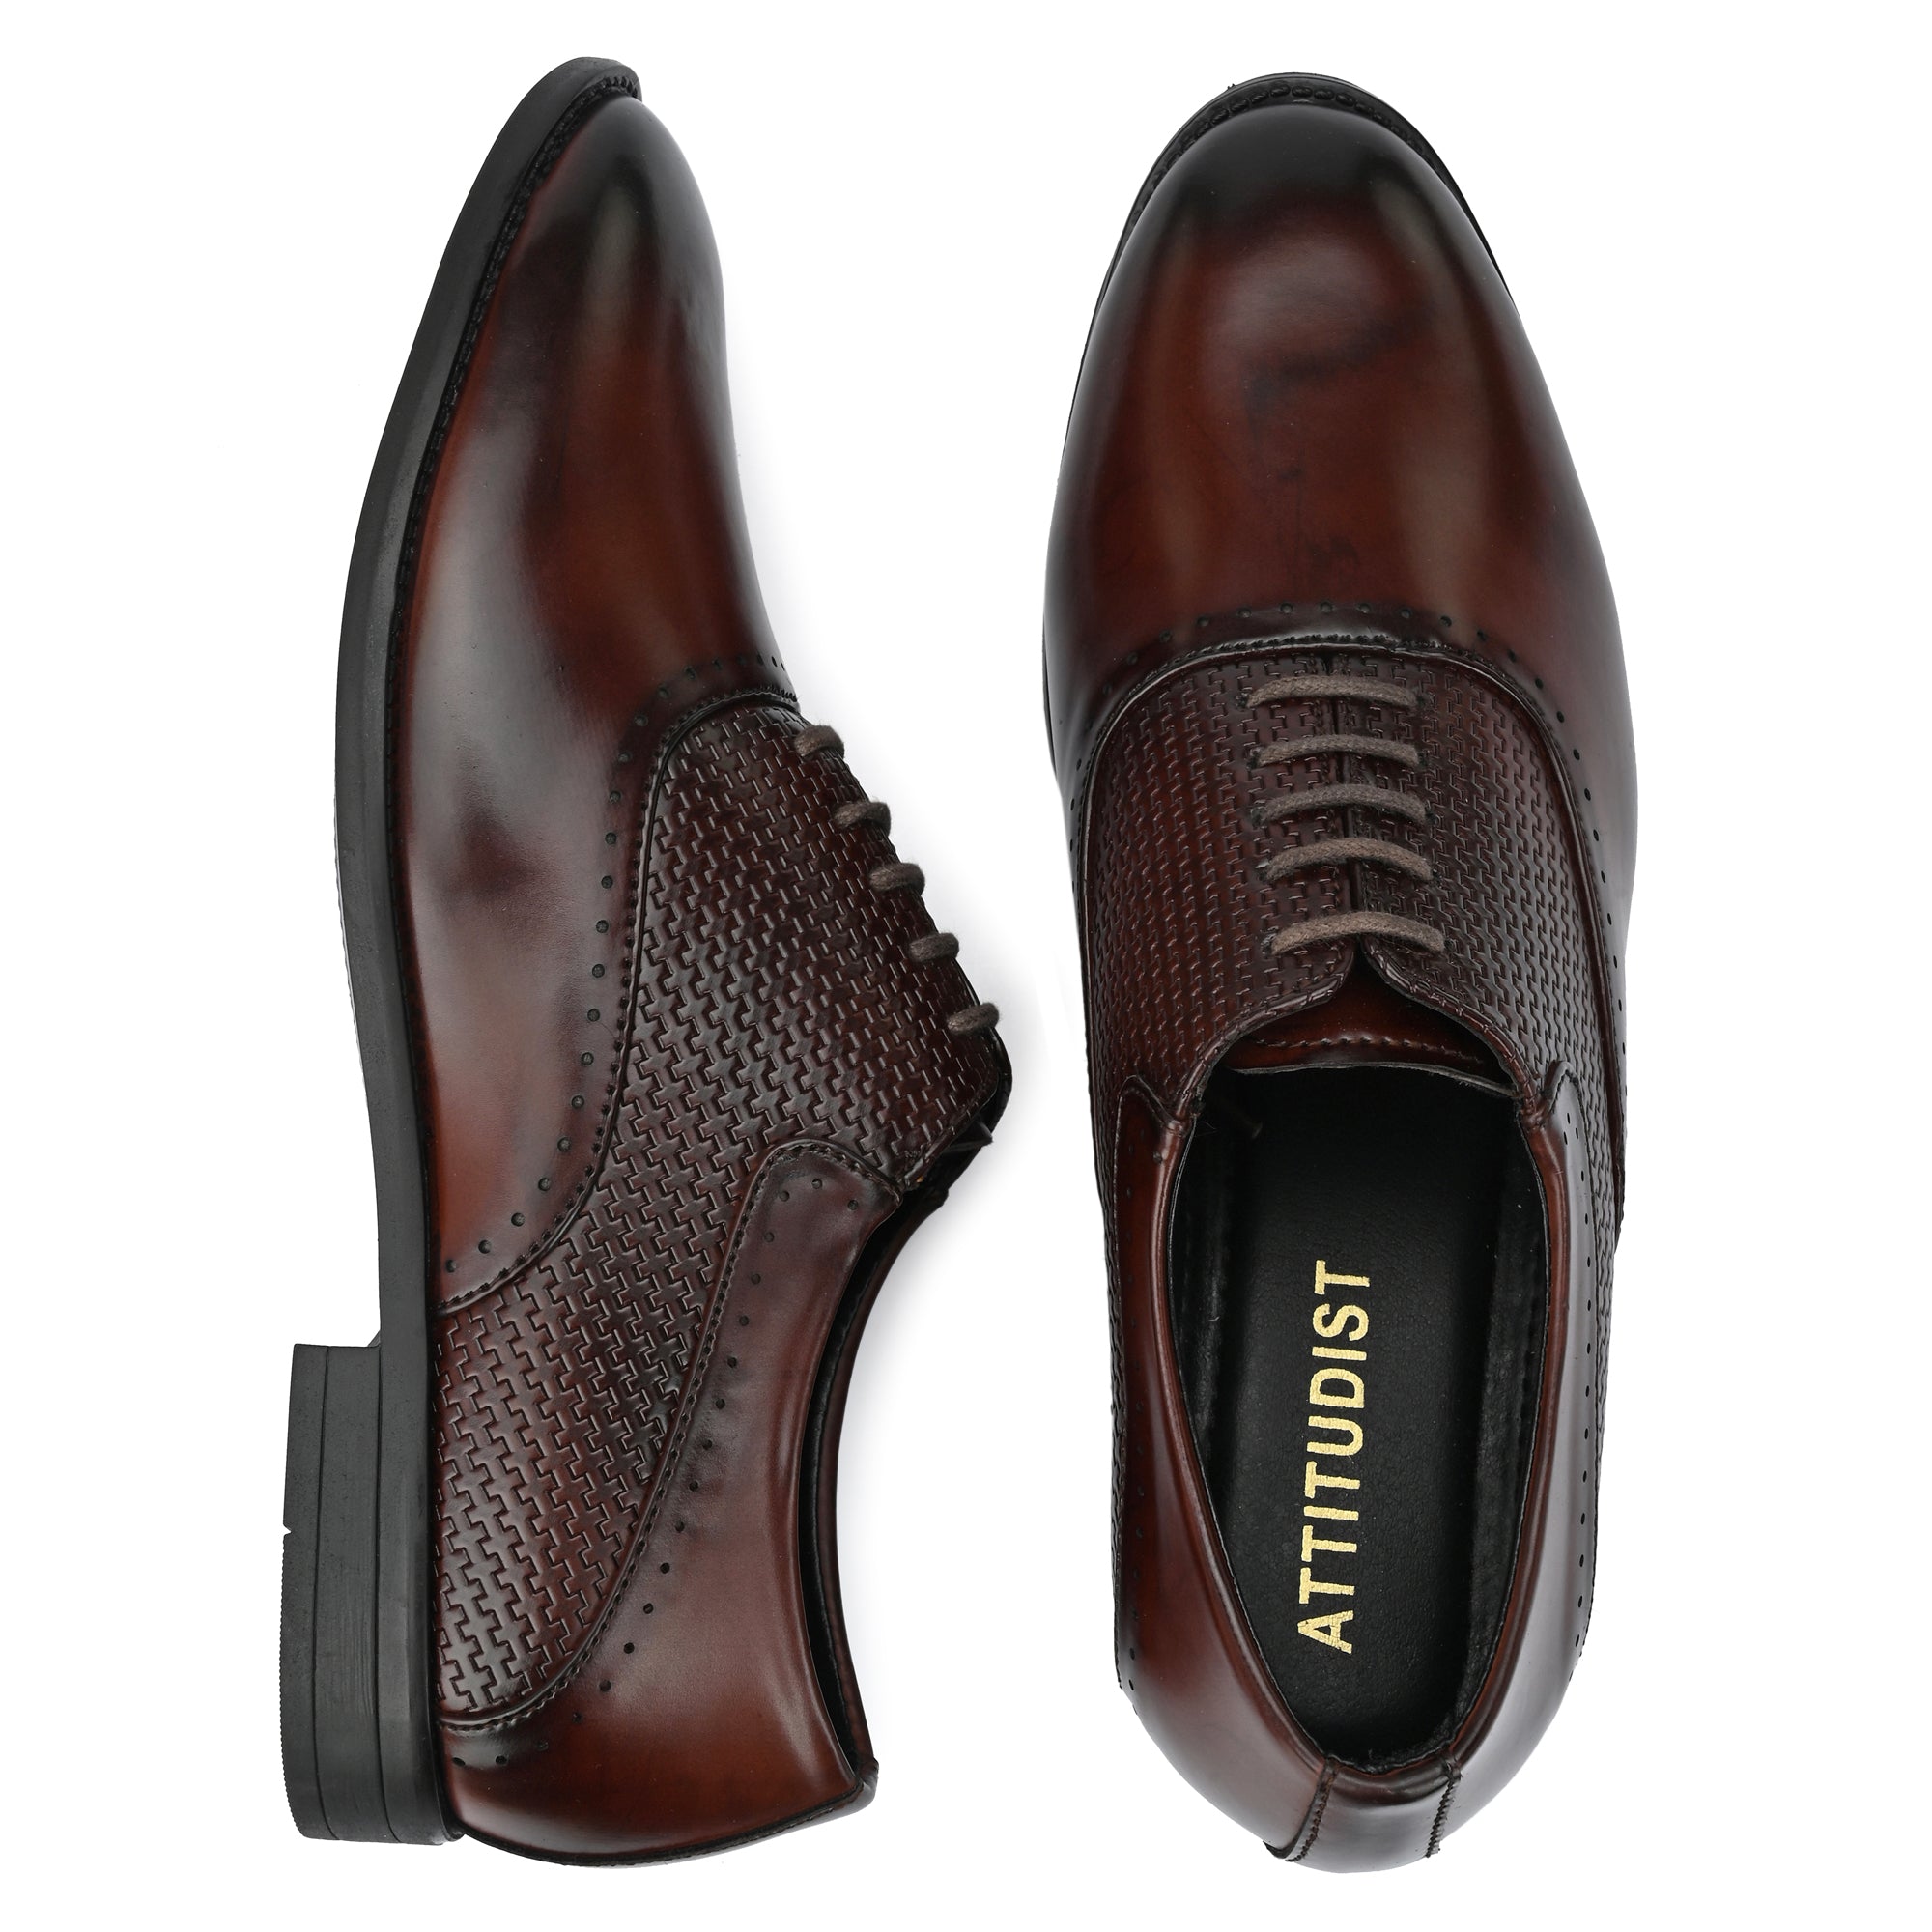 Attitudist Handcrafted Oxford Gradient Brown Formal Laceup Derby Shoes With Semi Chatai Design For Men MTOBSF